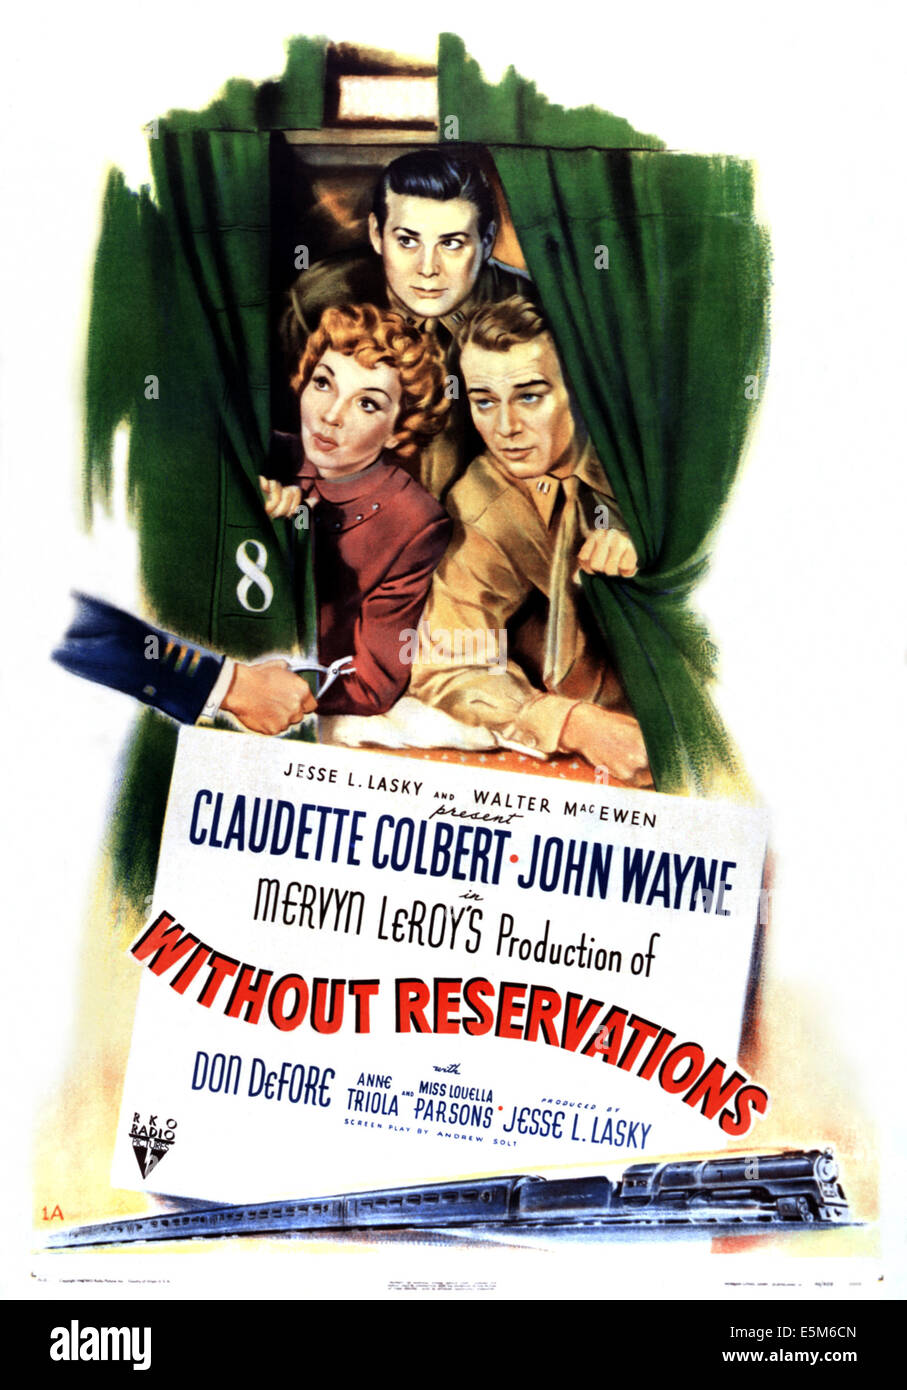 WITHOUT RESERVATIONS, Claudette Colbert, Don DeFore, John Wayne, 1946 Stock Photo